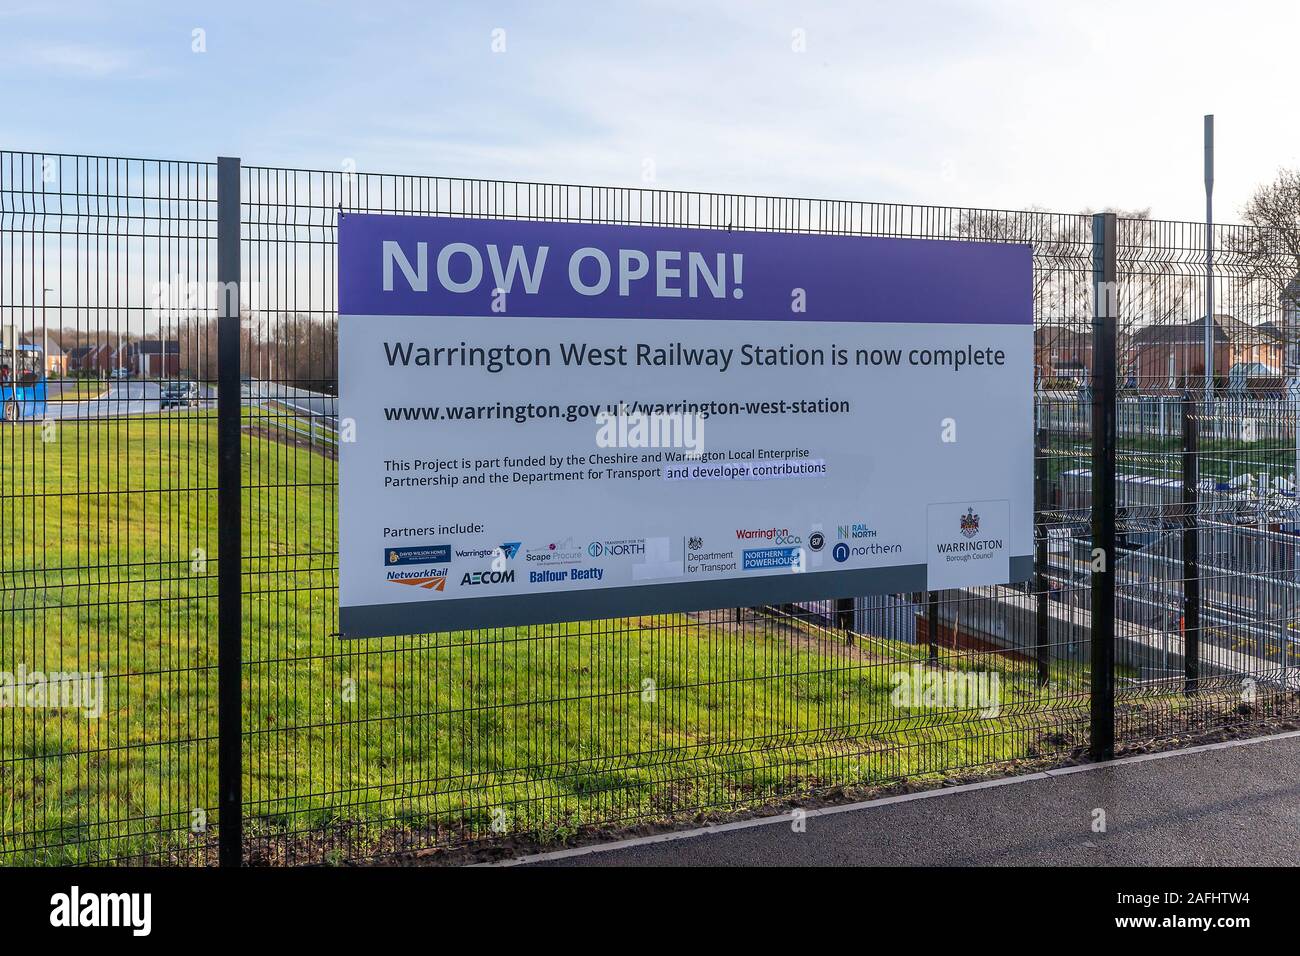 Warrington, Cheshire, UK. 16th Dec, 2019. The official opening of Warrington West Railway Station. A sign on the entry fence of Warrington West Railway Station, Chapelford, Warrington, Cheshire, England states that the station is now open Credit: John Hopkins/Alamy Live News Credit: John Hopkins/Alamy Live News Stock Photo